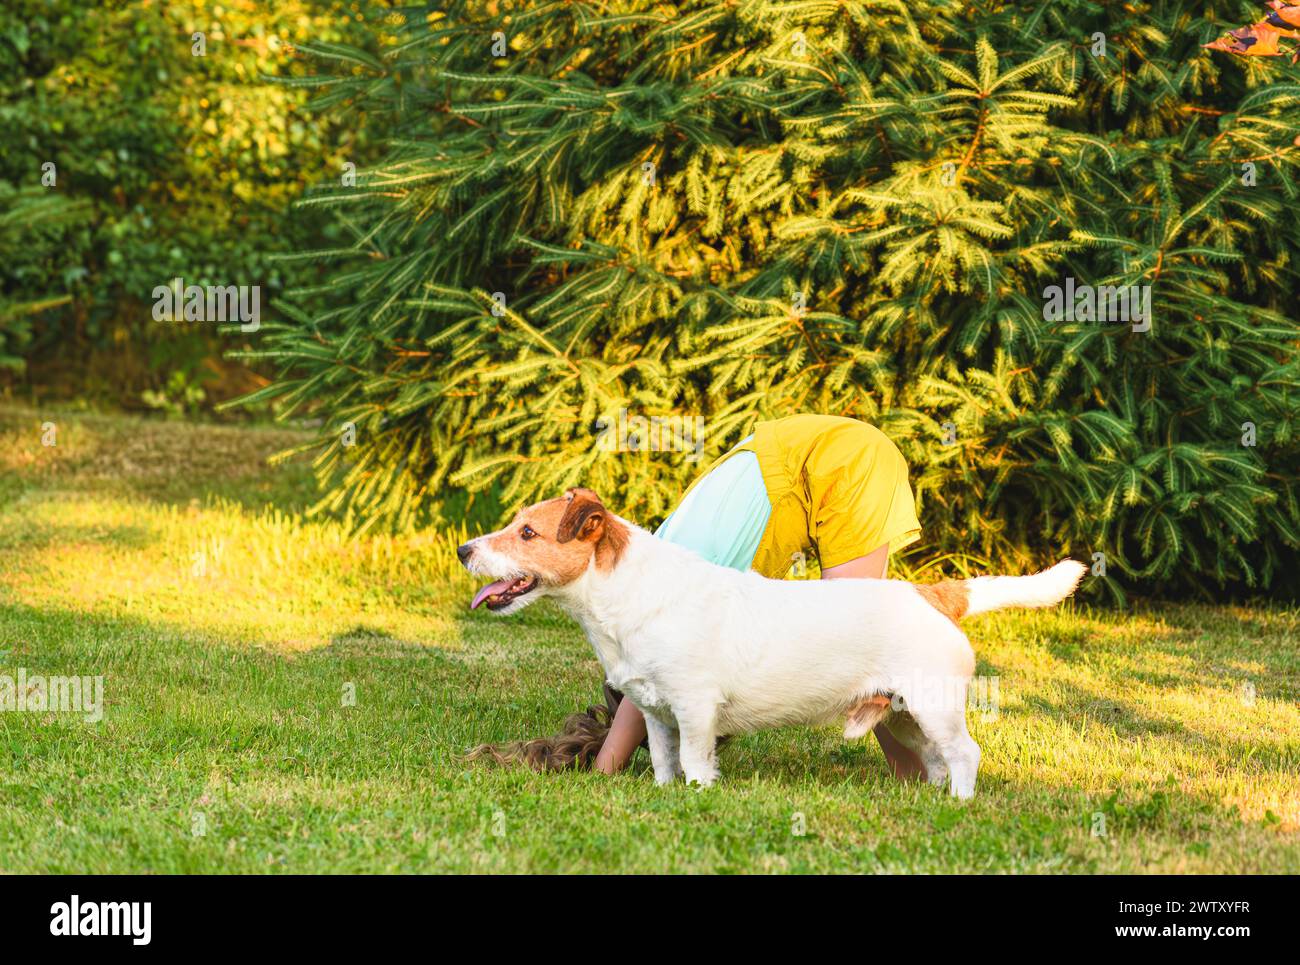 Kid doing yoga exercise outdoors is standing in dog pose Stock Photo